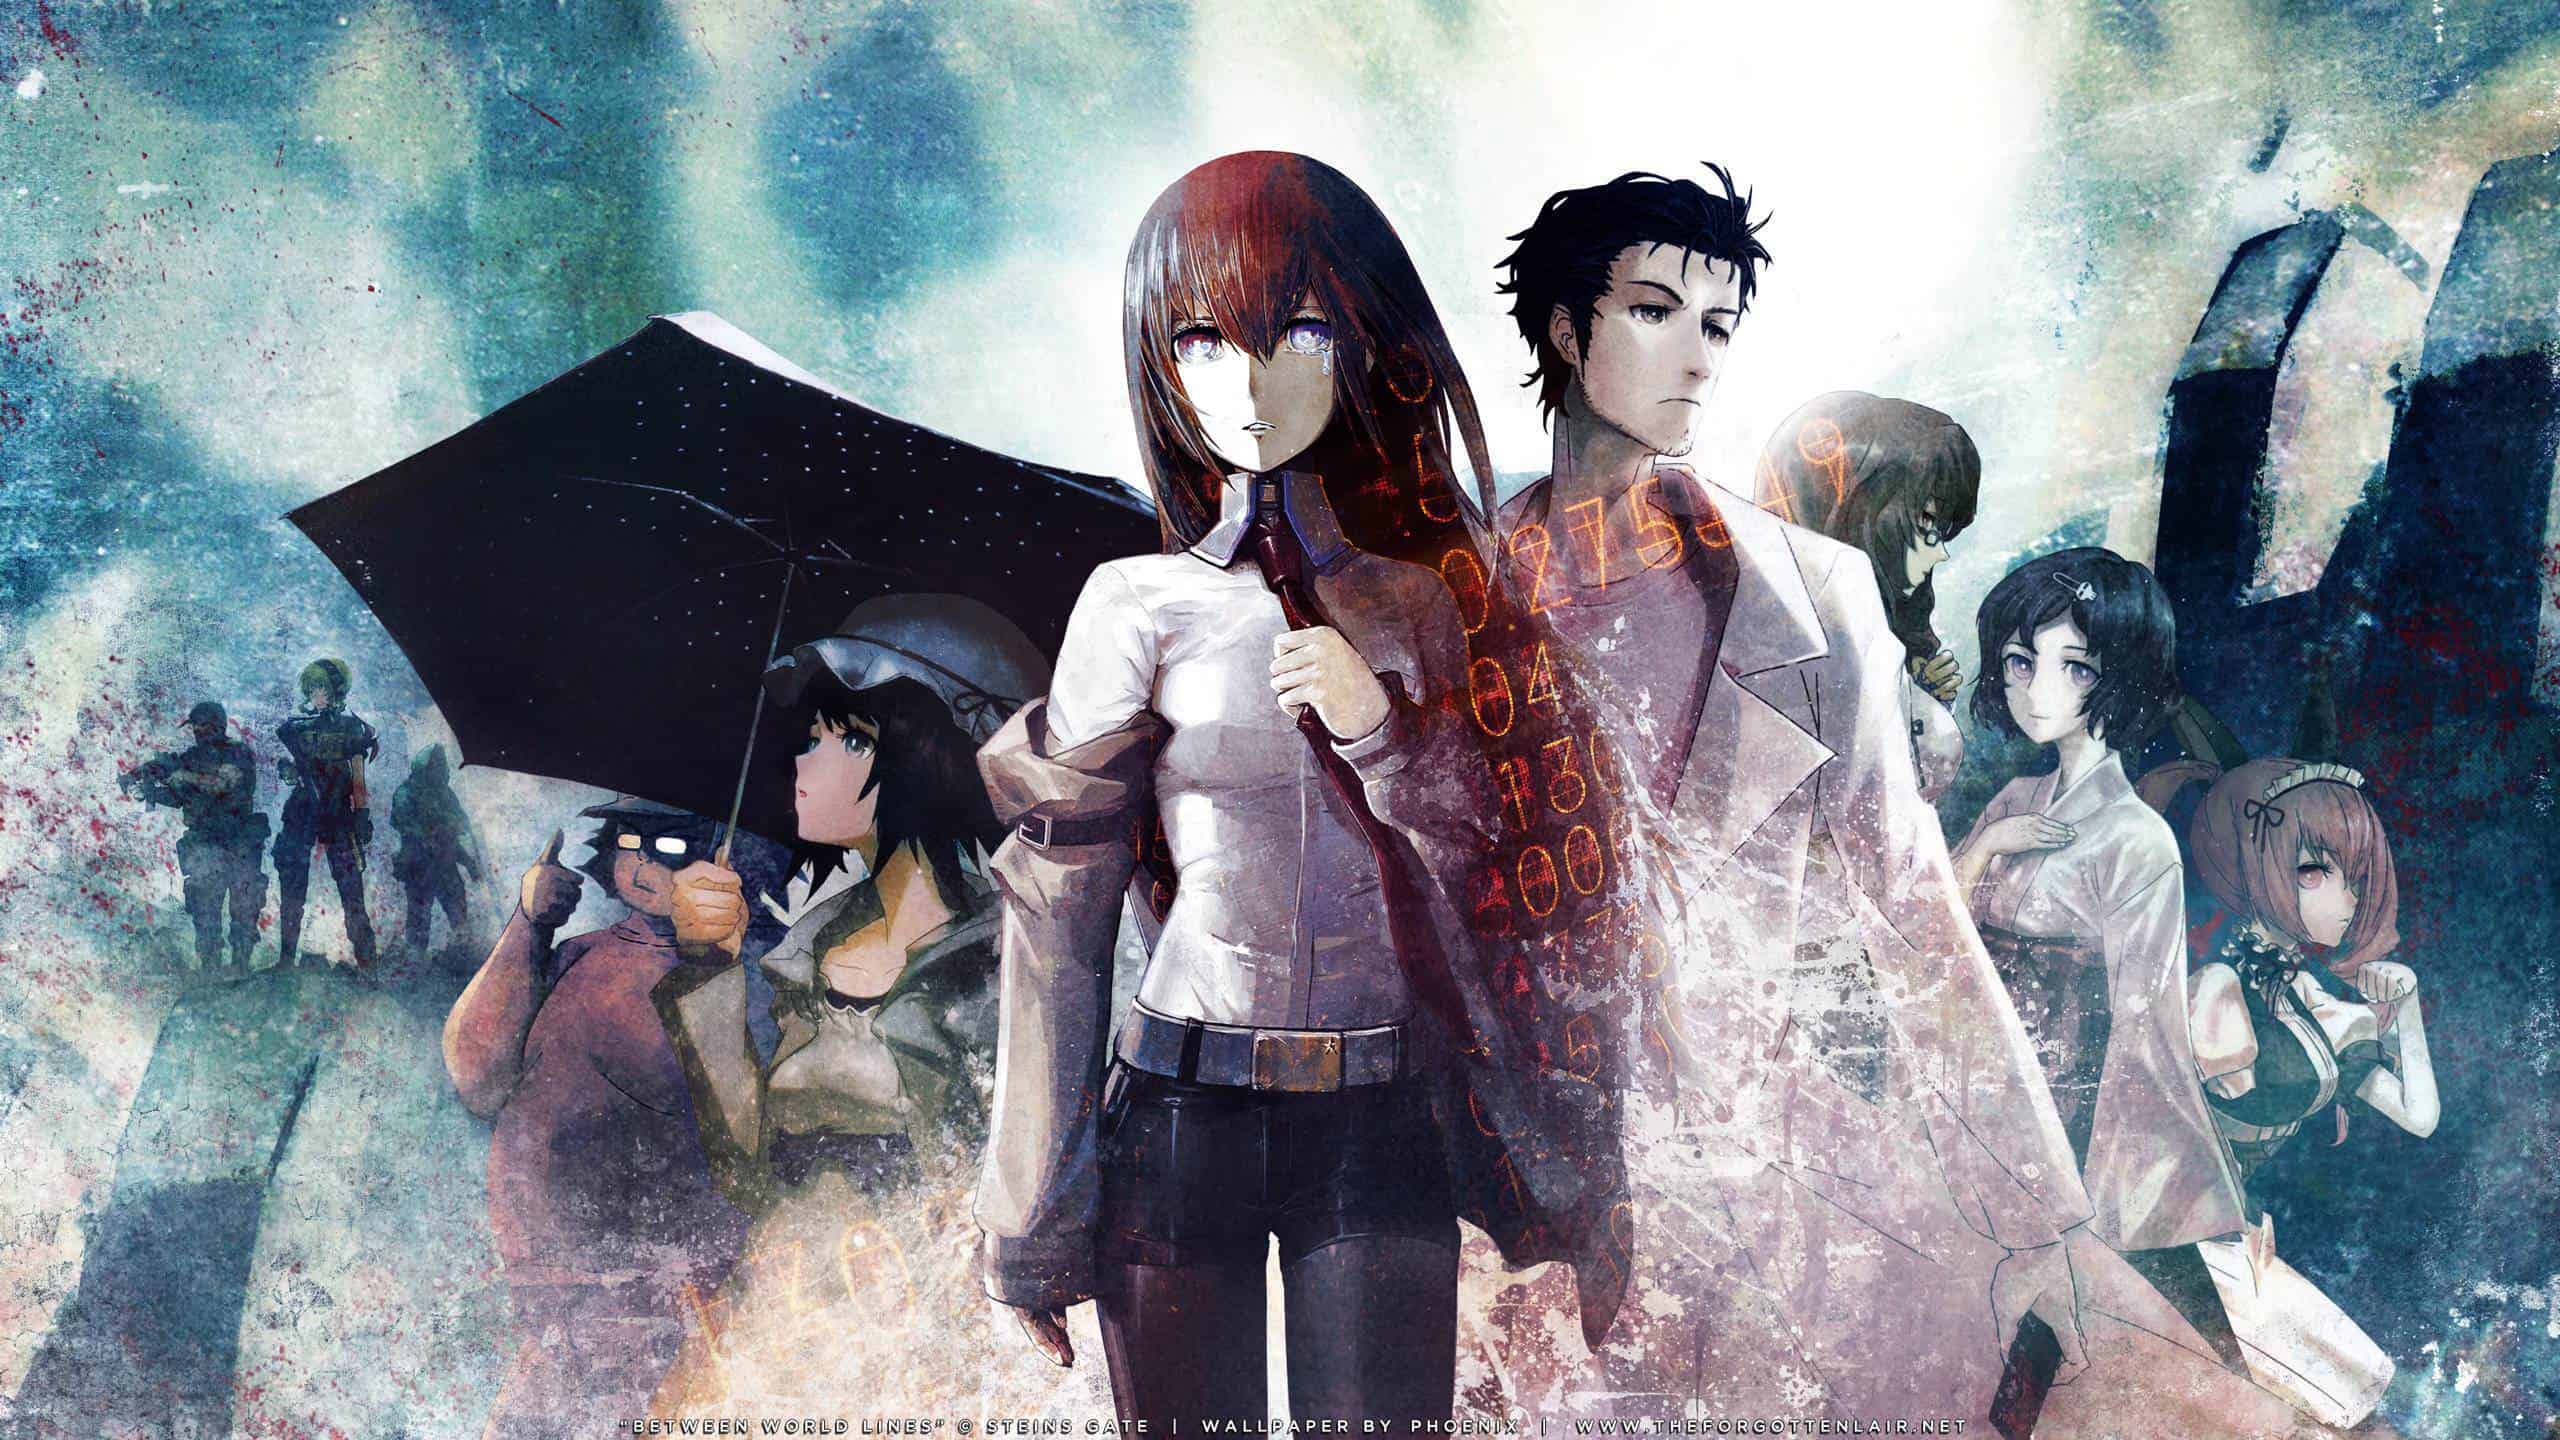 Steins;Gate timeline explained